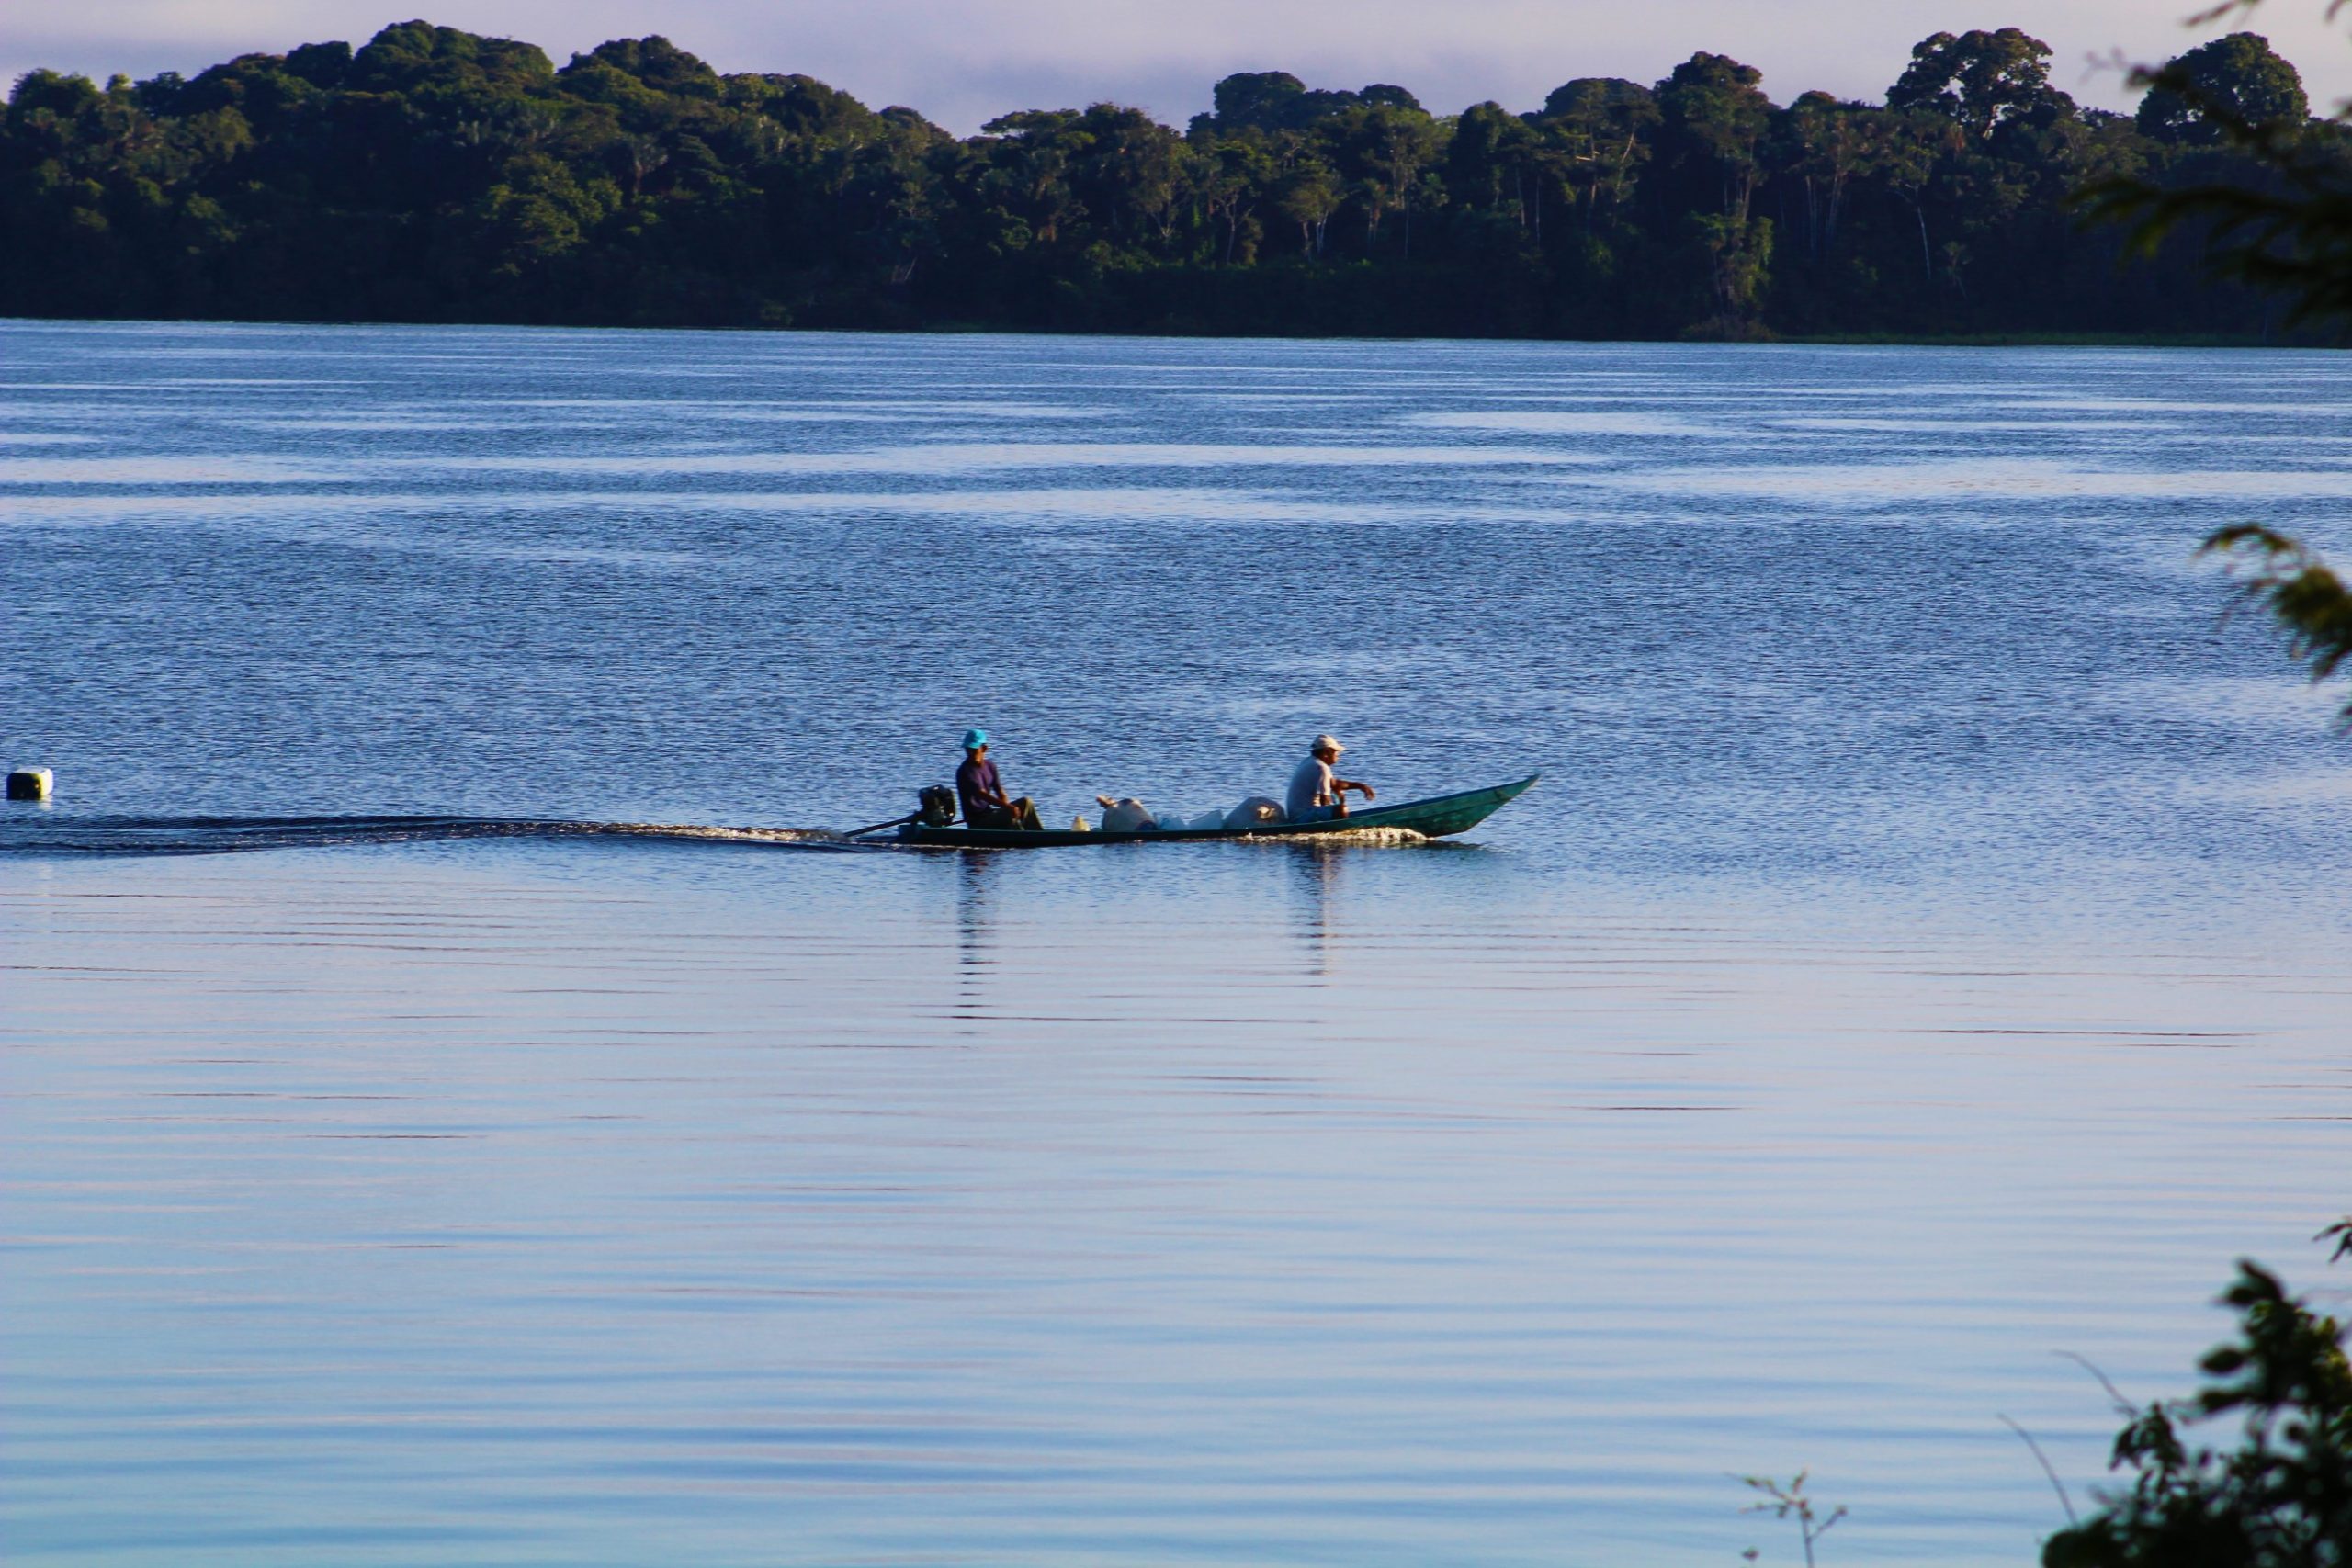 Two people traveling on a river in a motorized canoe